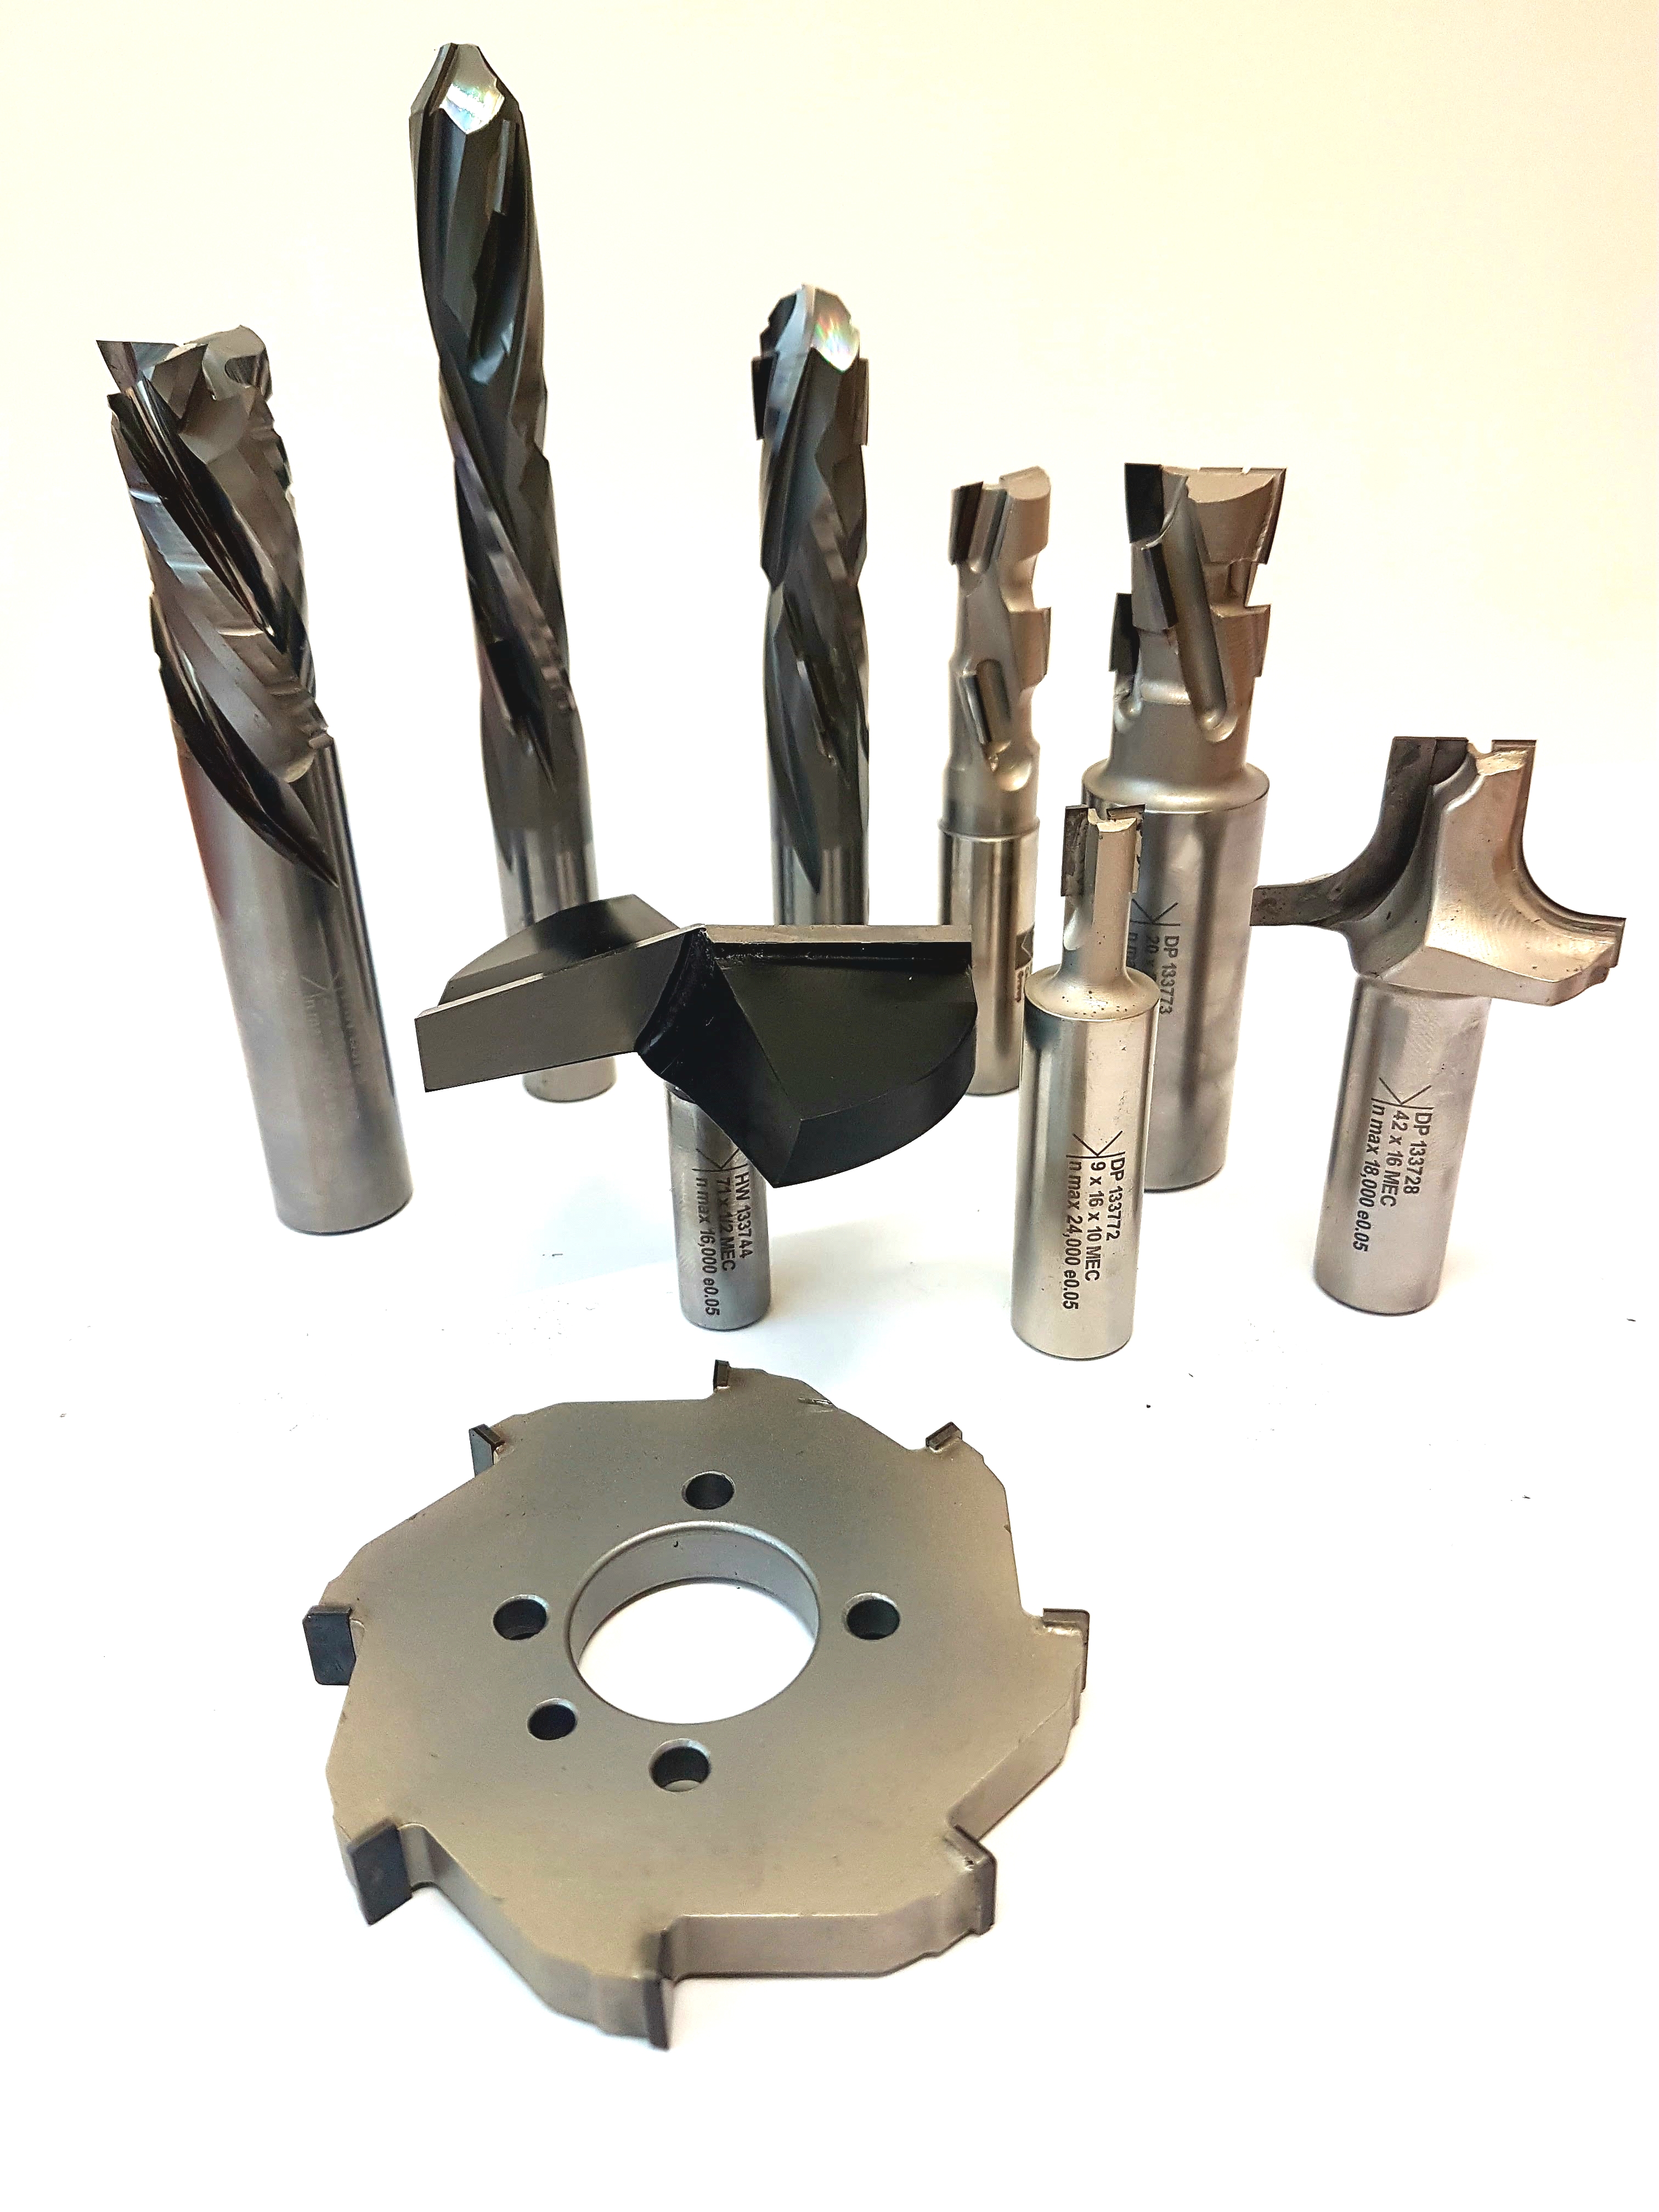 Standard and bespoke tooling